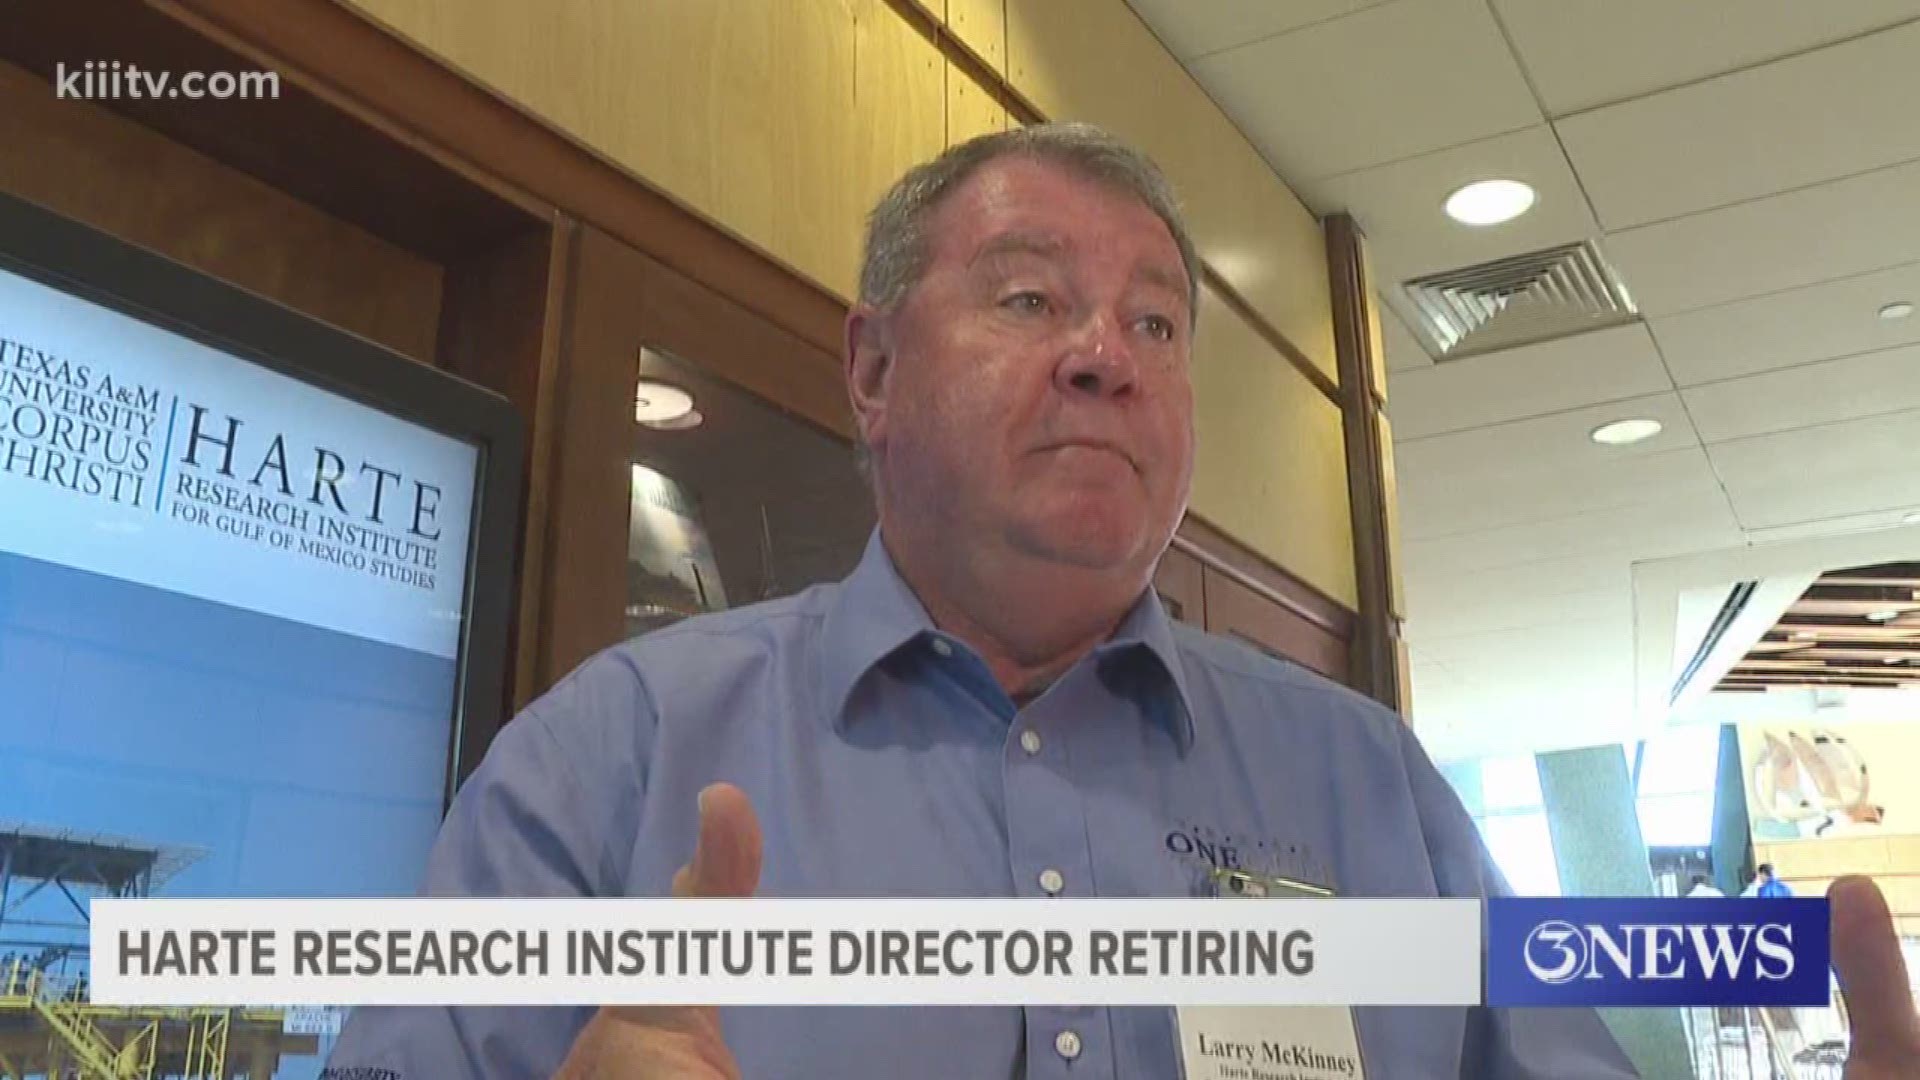 A national search to find Dr. Larry McKinney's replacement will begin in January.